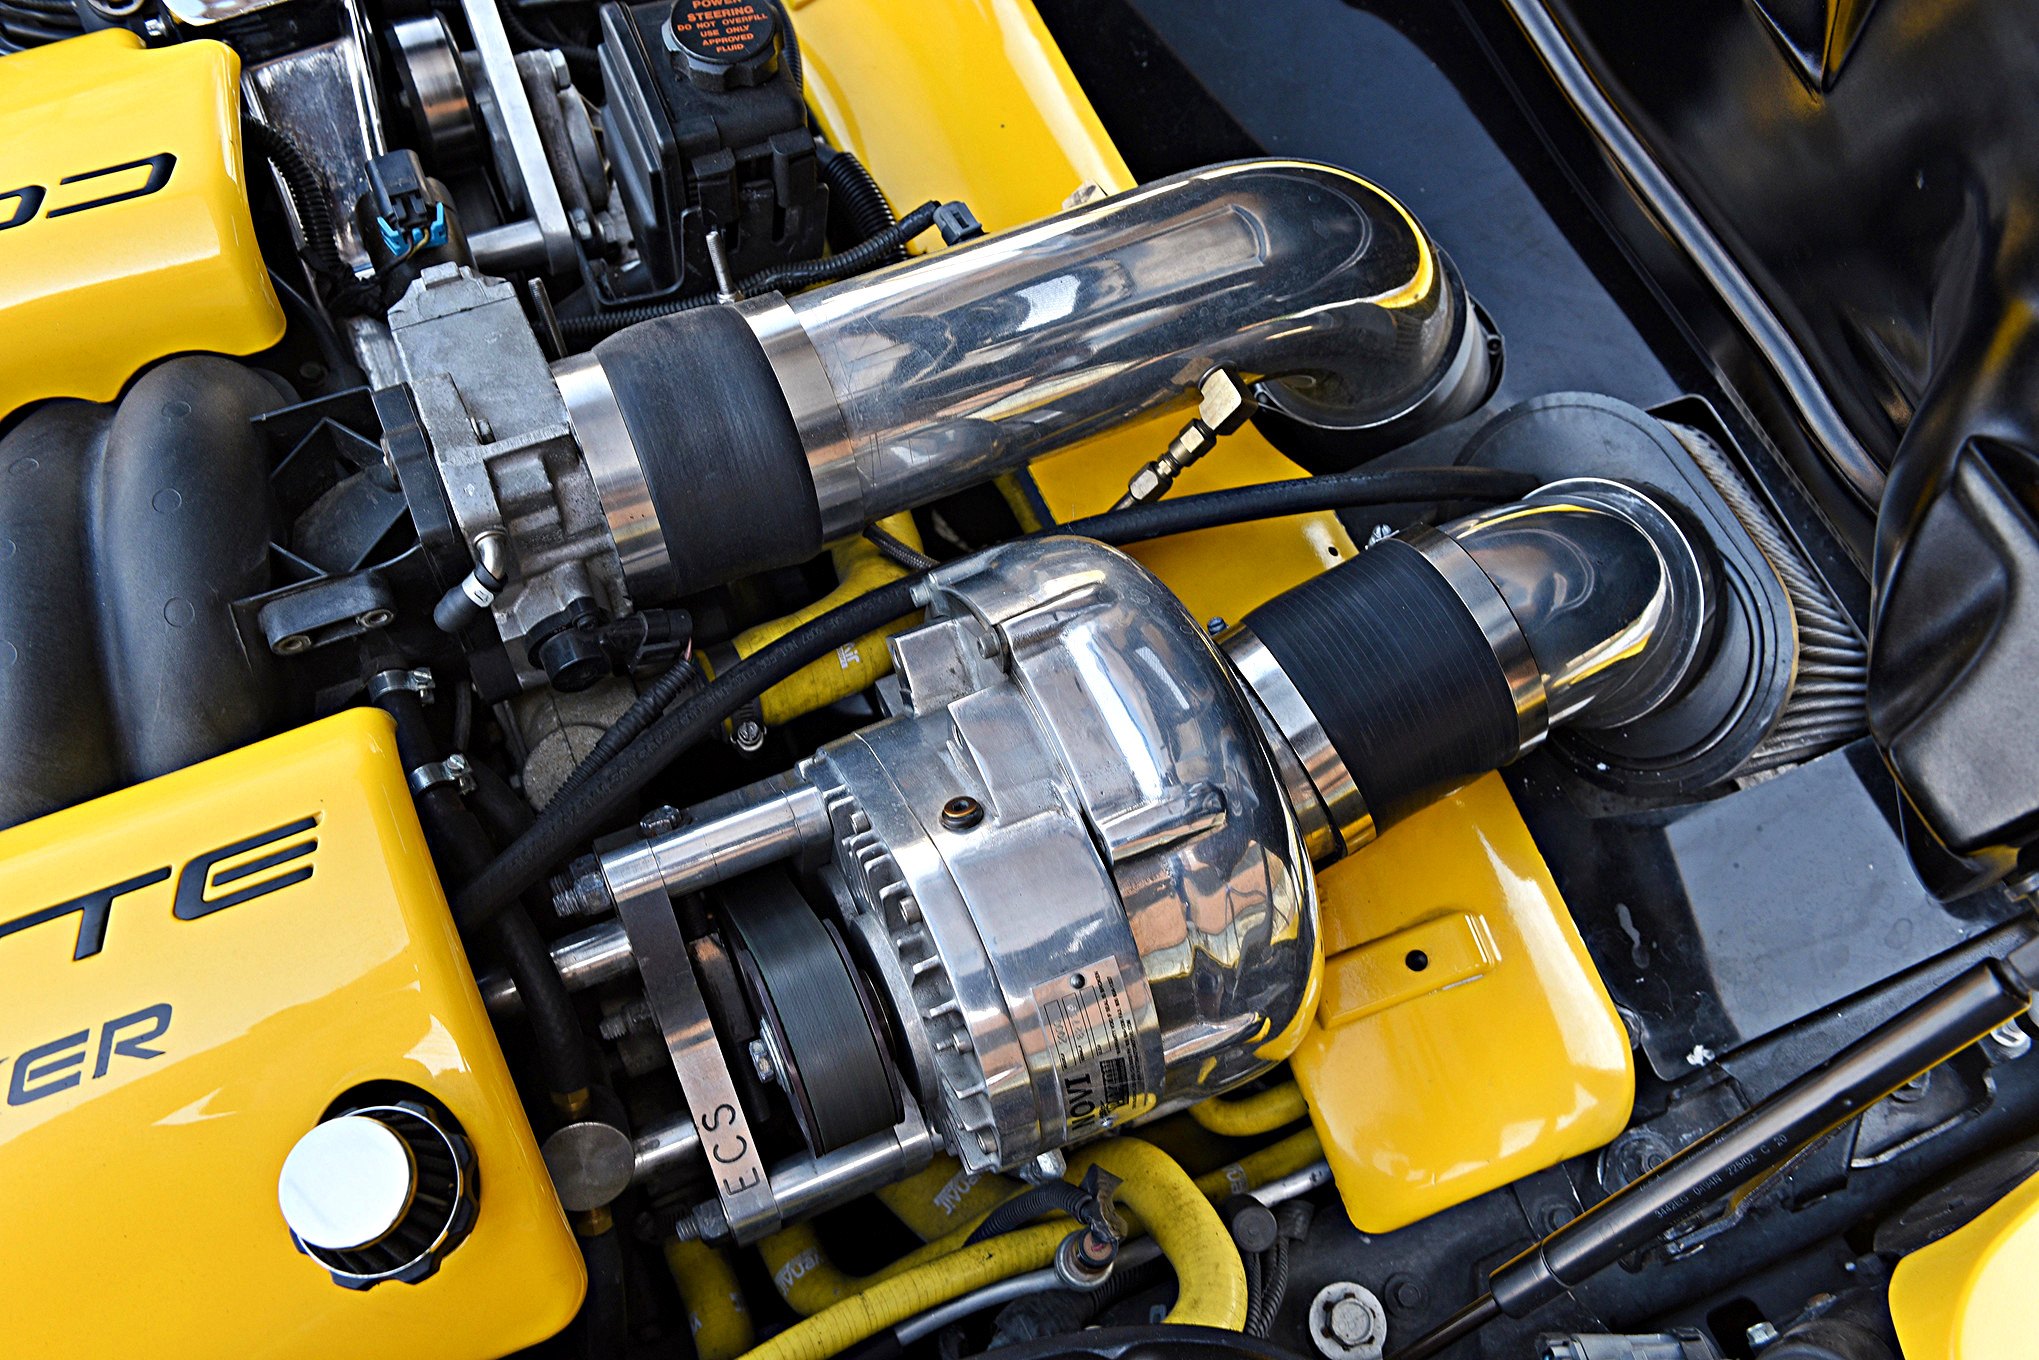 Custom Exhaust System on Yellow Chevy Corvette - Photo by Scotty Lachenauer